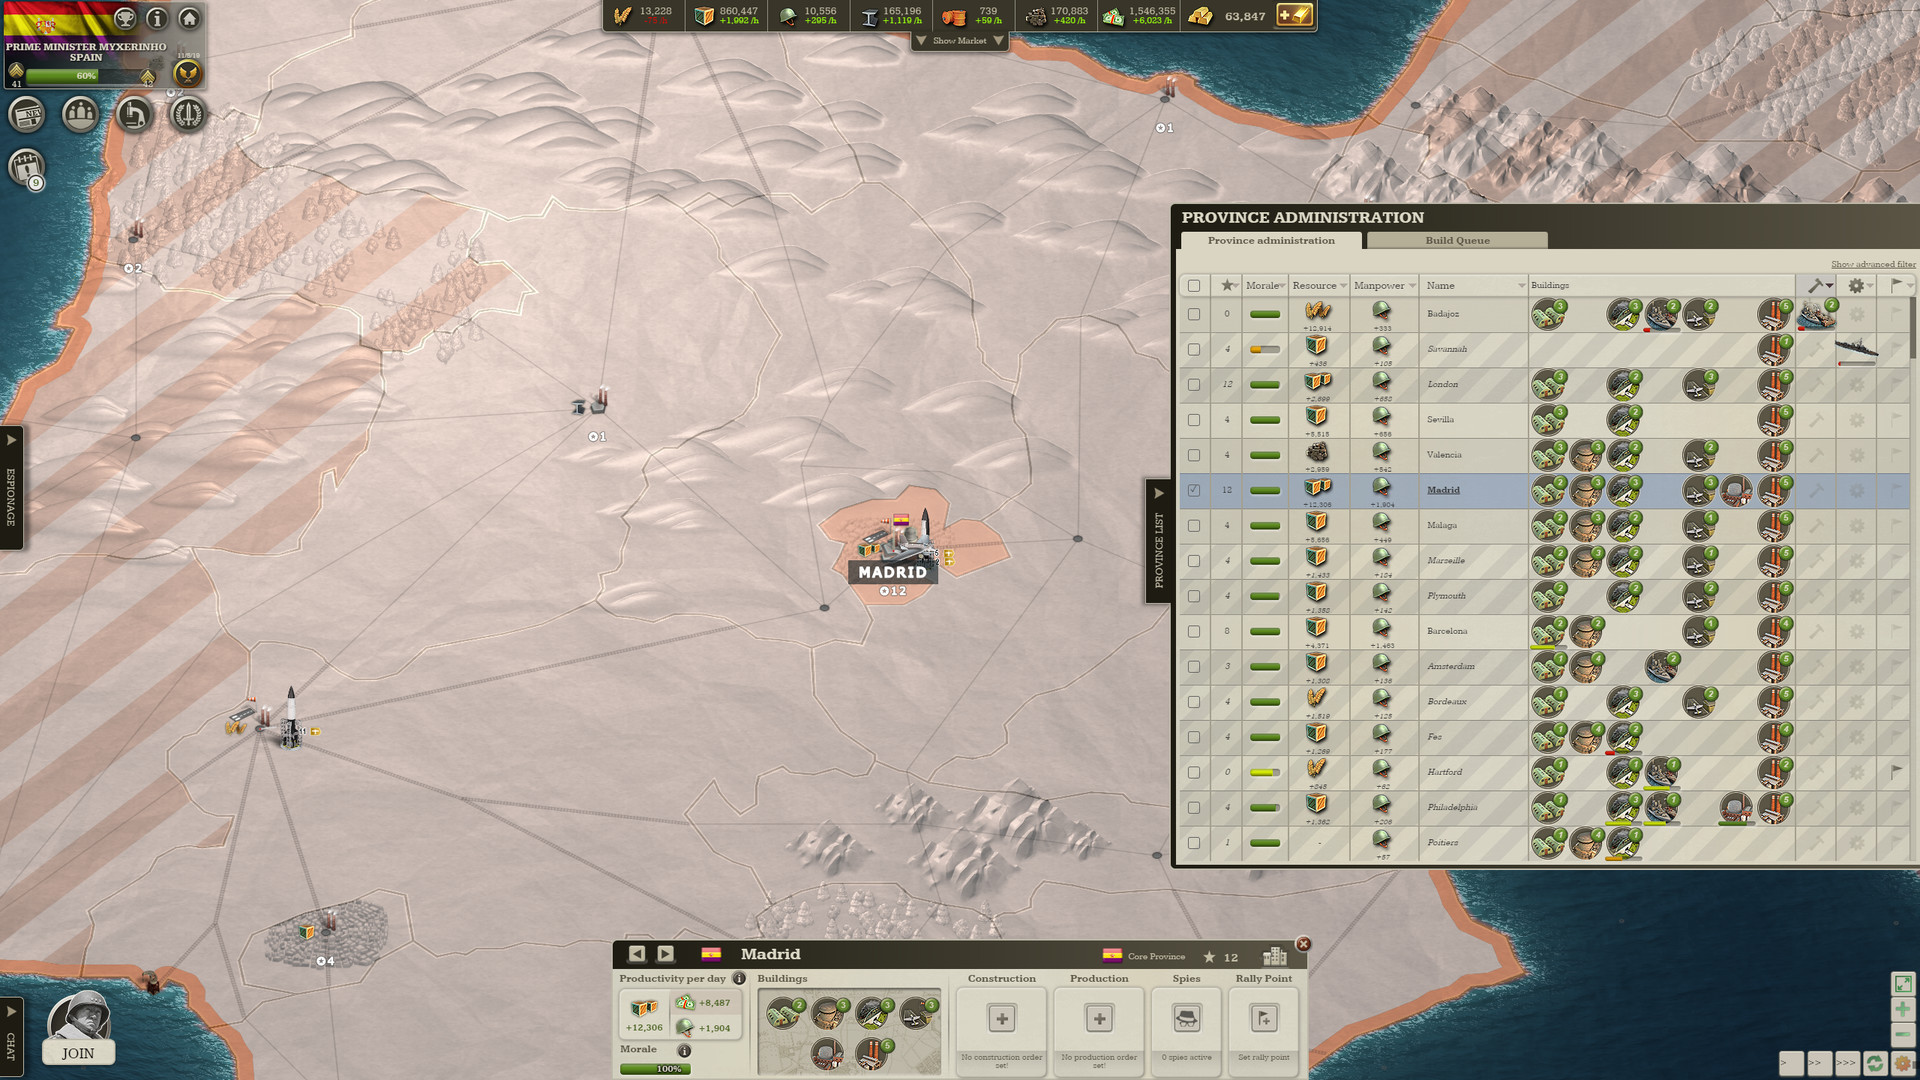 call of war 1942 strategy units